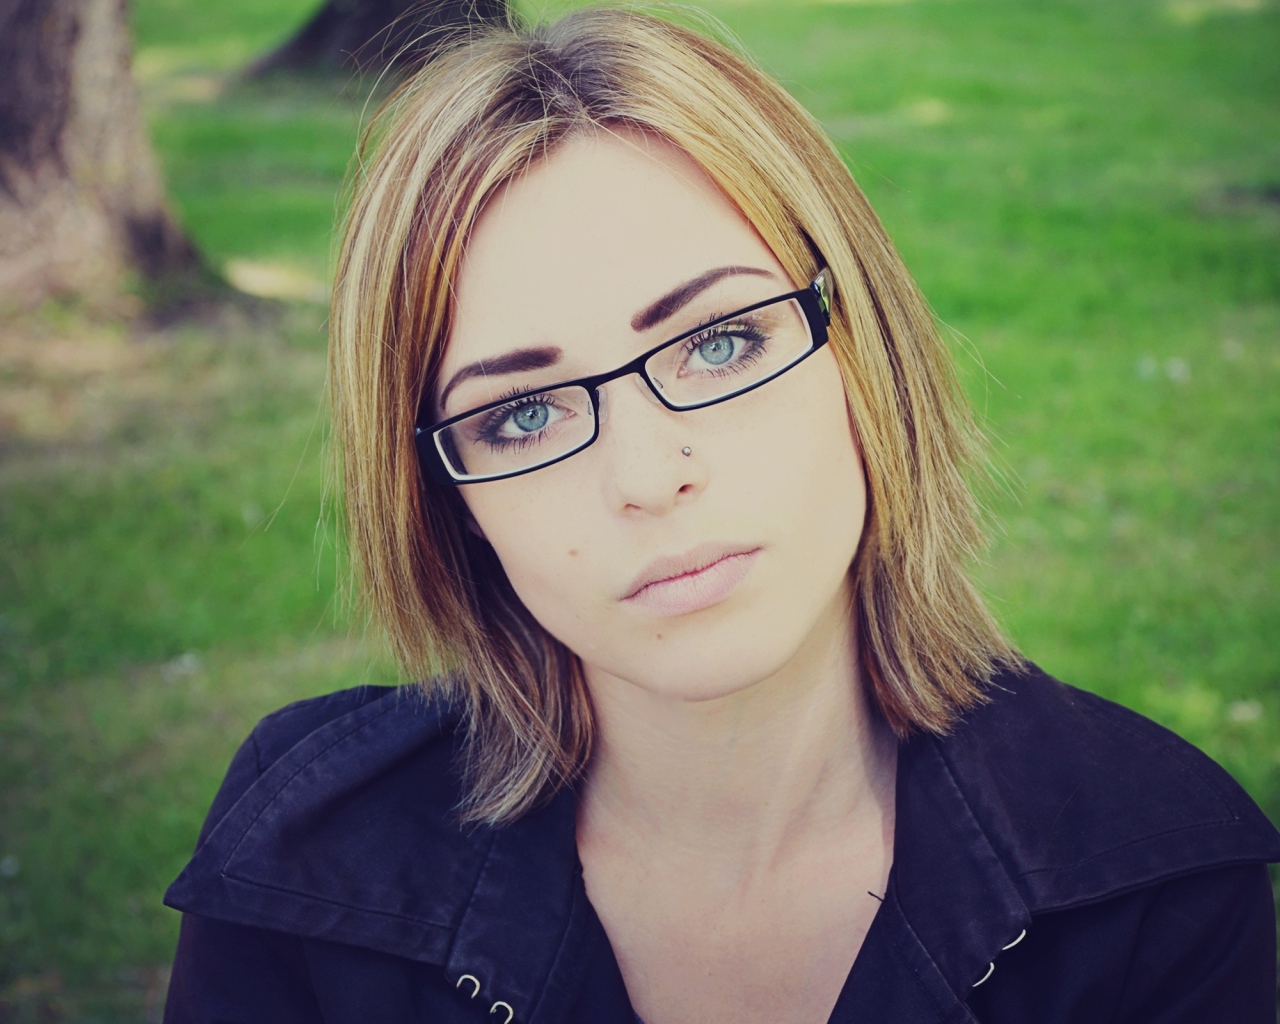 Blonde girl with piercings in the nose with glasses